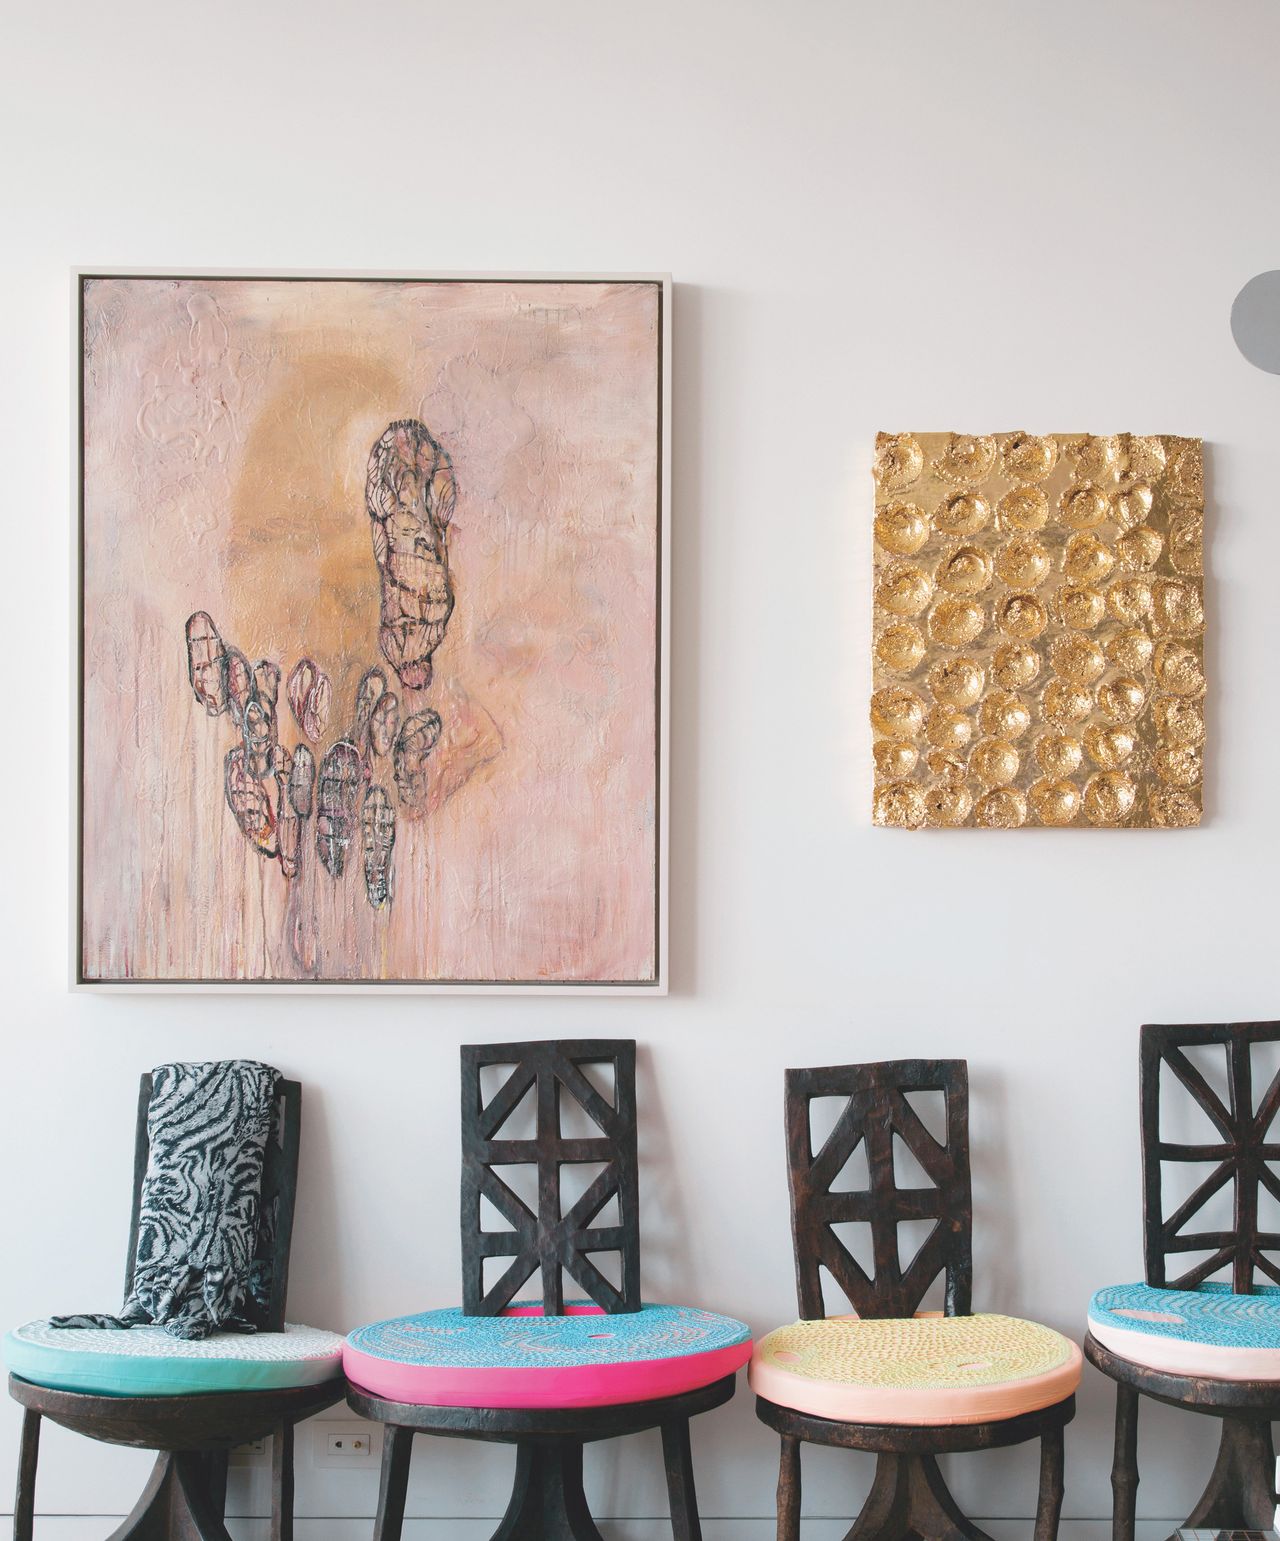 The home of Cindy Sherman: Besty Berne's 1996 painting "Dong Song" next to Otto Piene's 2011 glazed clay piece "The Golden Idaho." Berne, a longtime friend of Sherman's, is now primarily a writer. Sherman bought the Piene at a benefit auction.